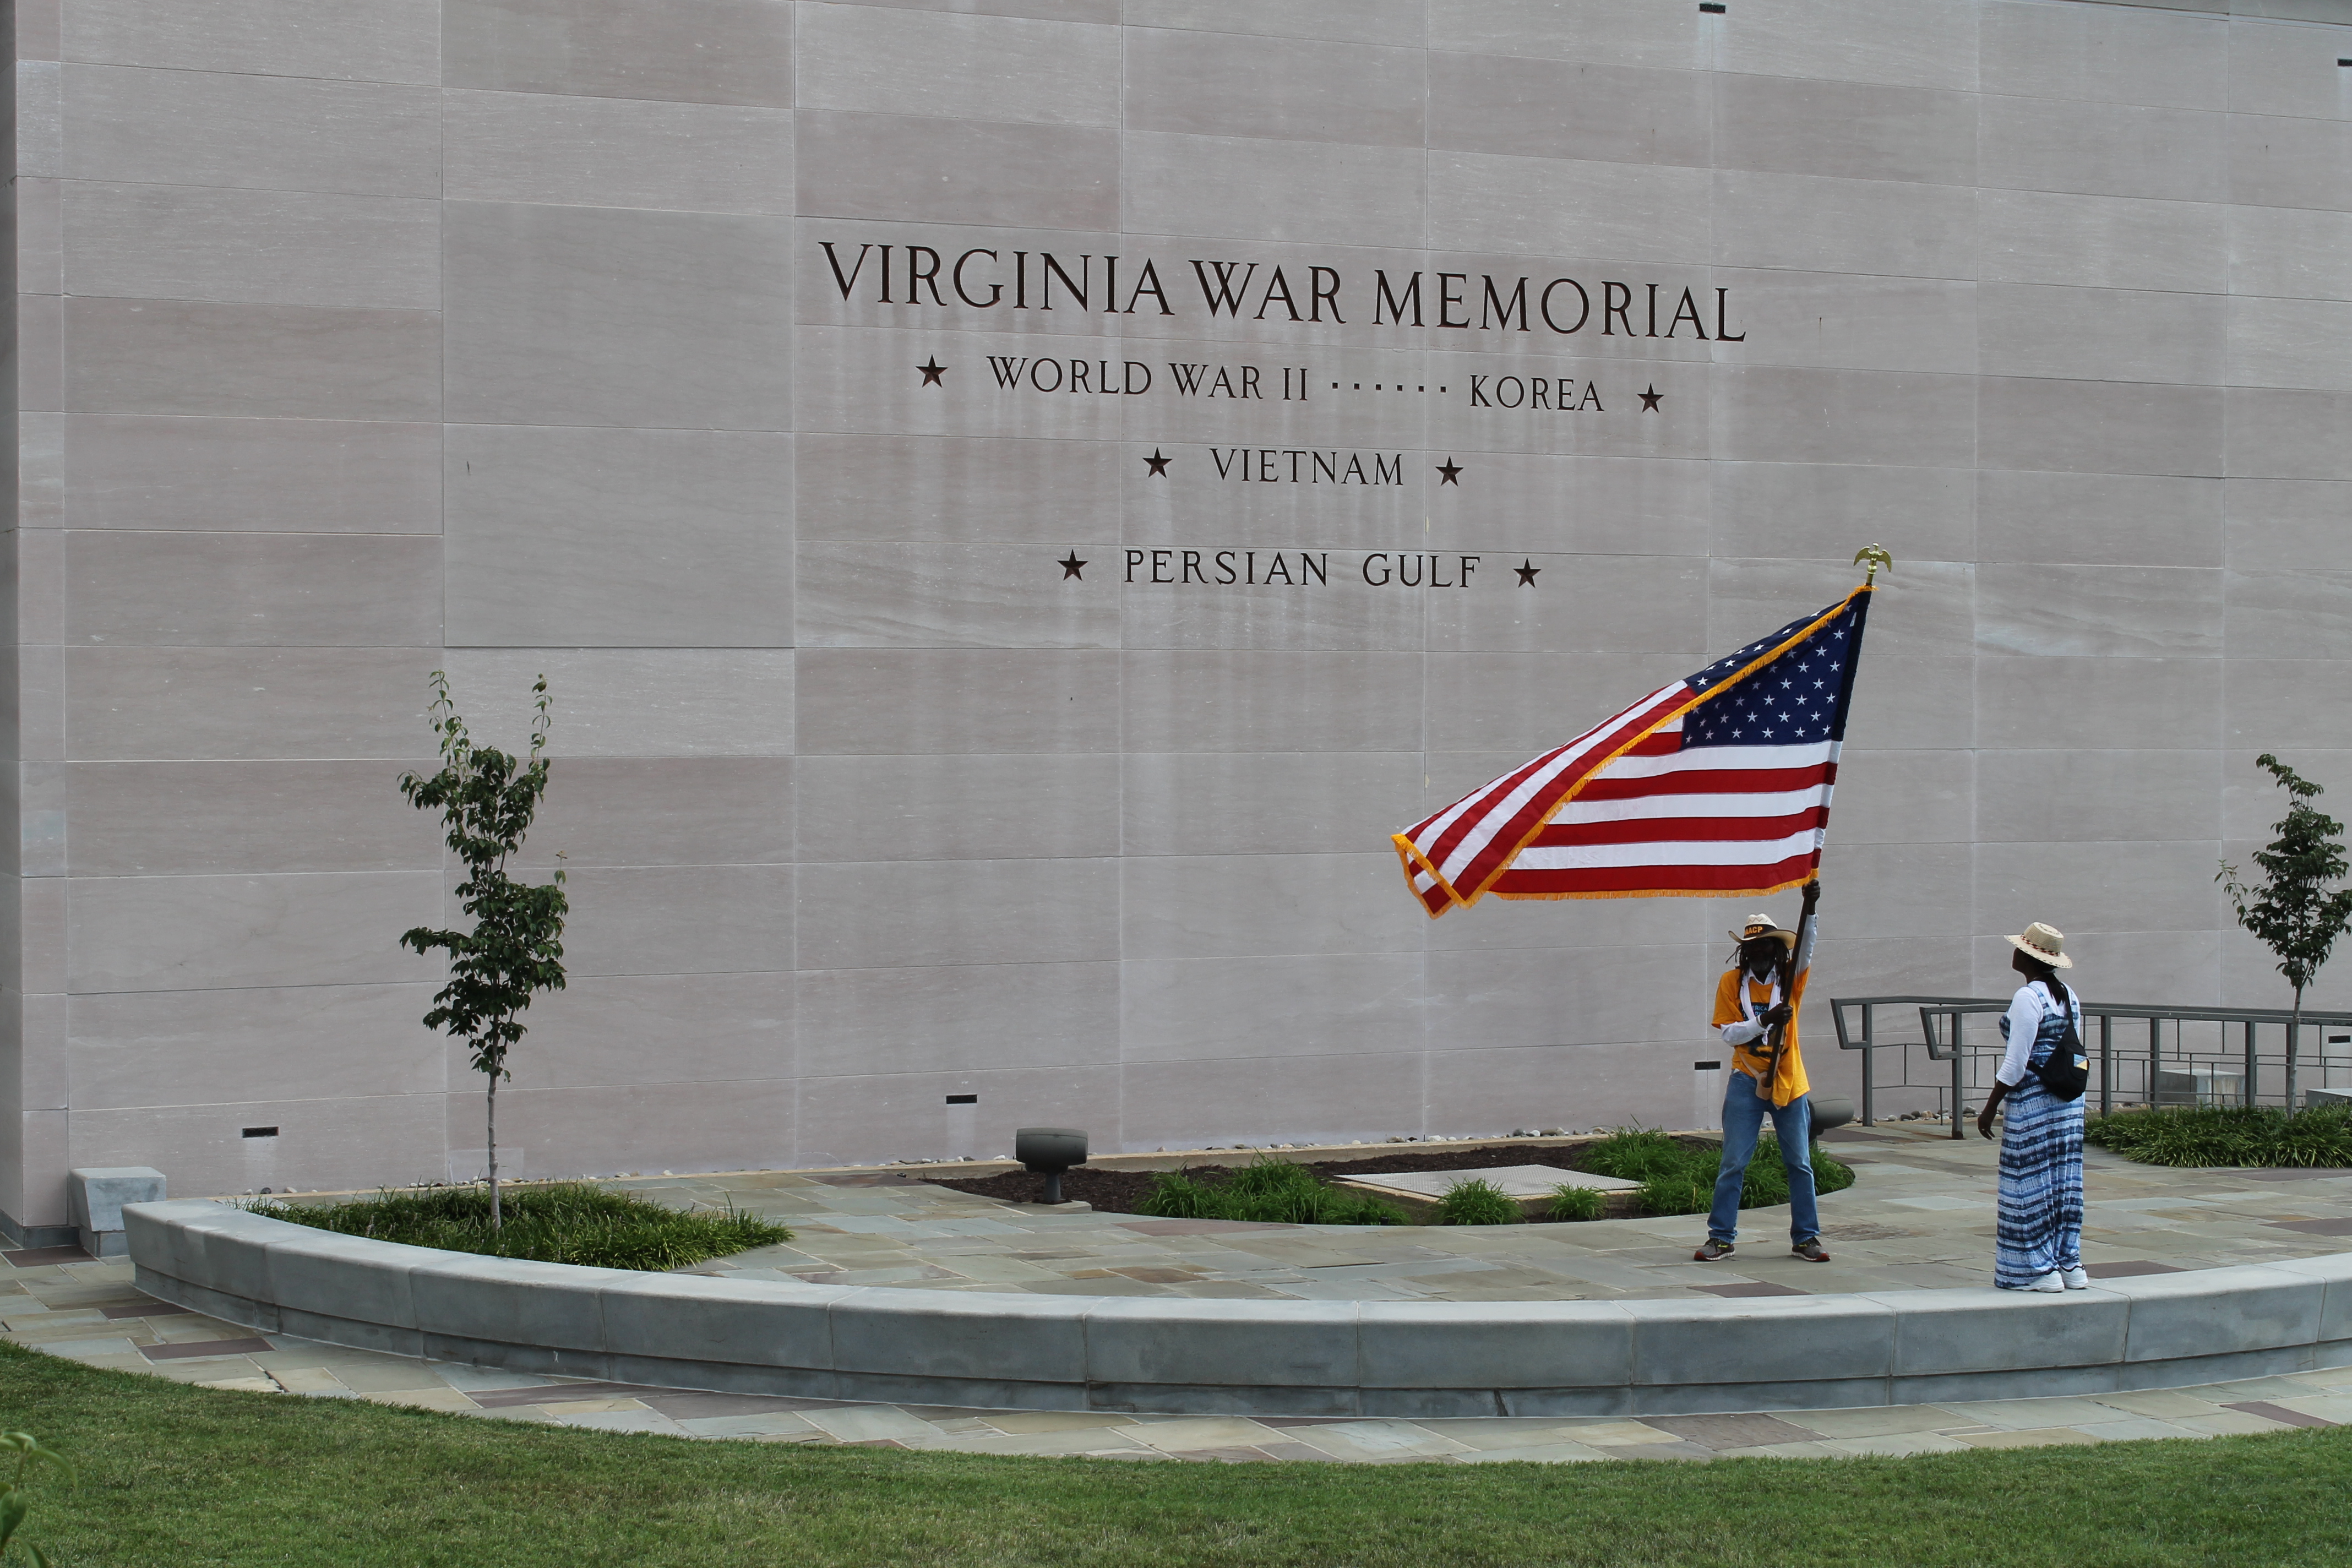 Middle Passage waving American flag in front of the Virginia war memorial